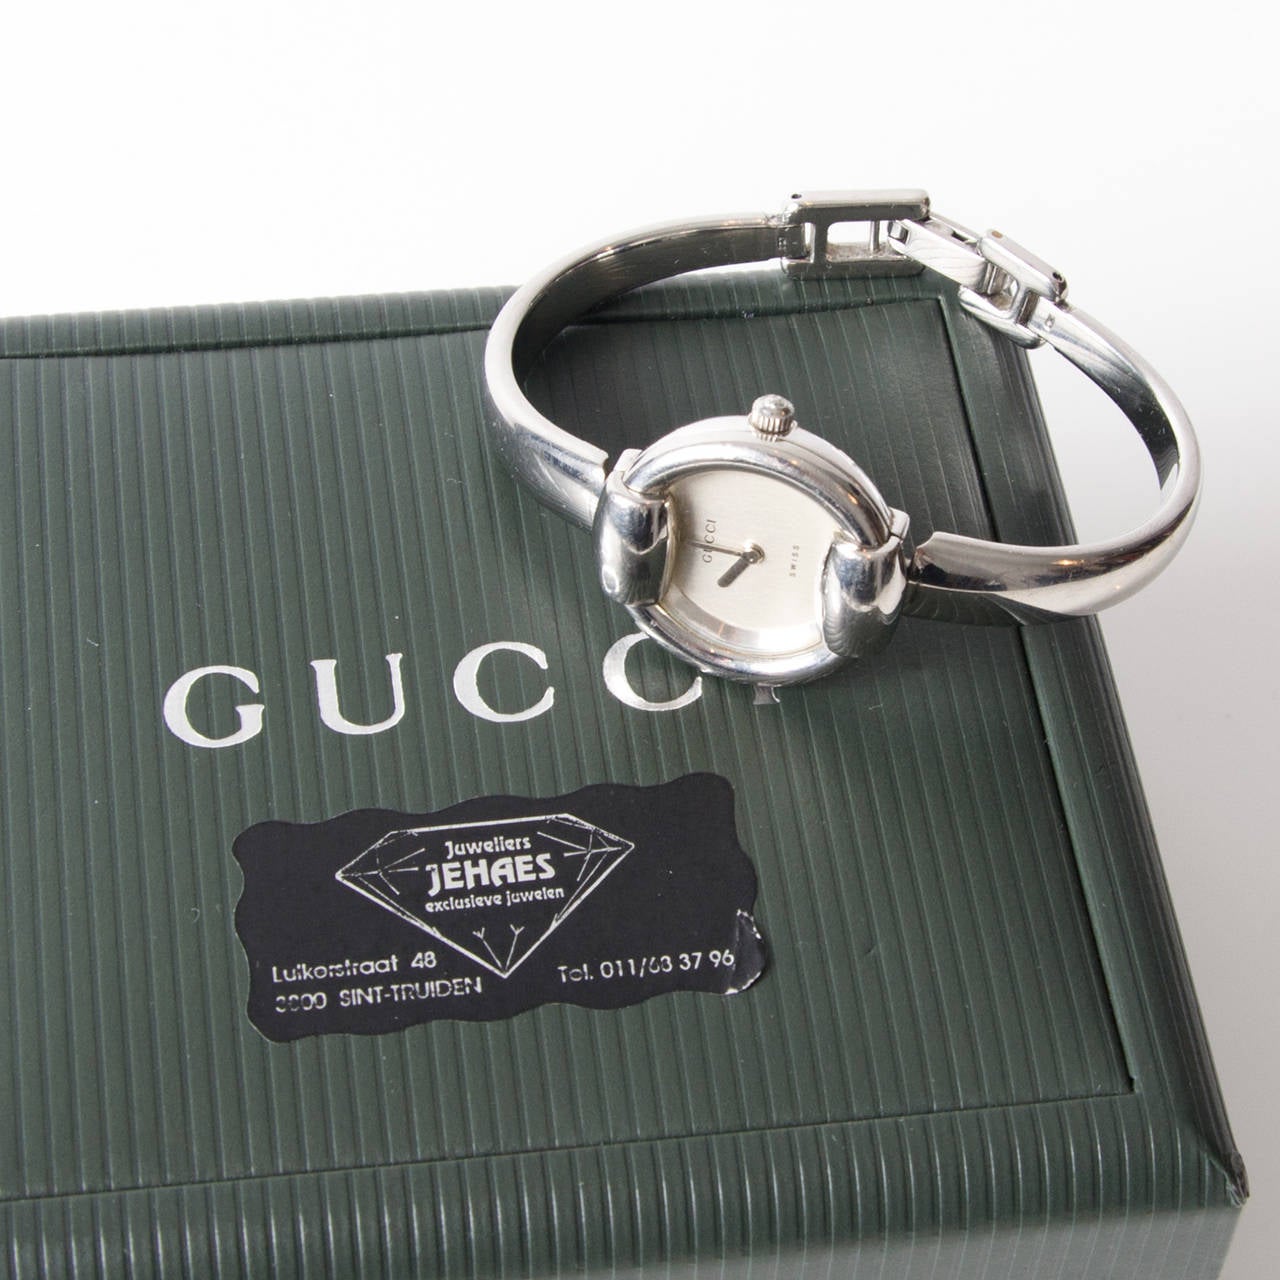 Gucci 1400l Stainless Steel Silver Tone 